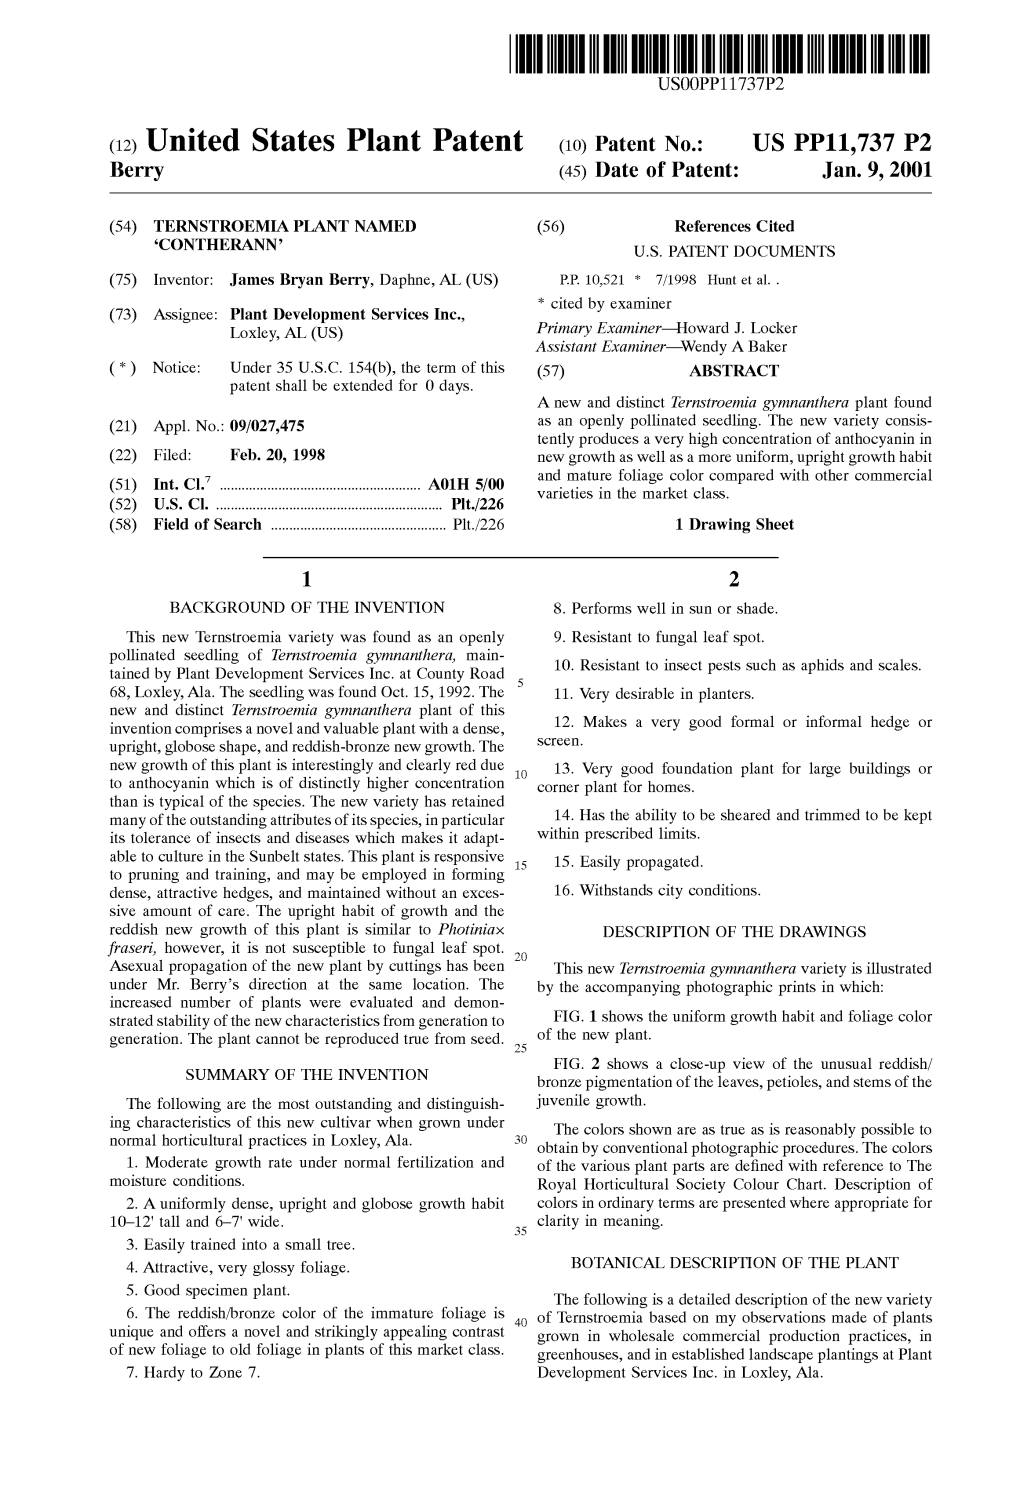 (12) United States Plant Patent (10) Patent N0.: US PP11,737 P2 Berry (45) Date of Patent: Jan